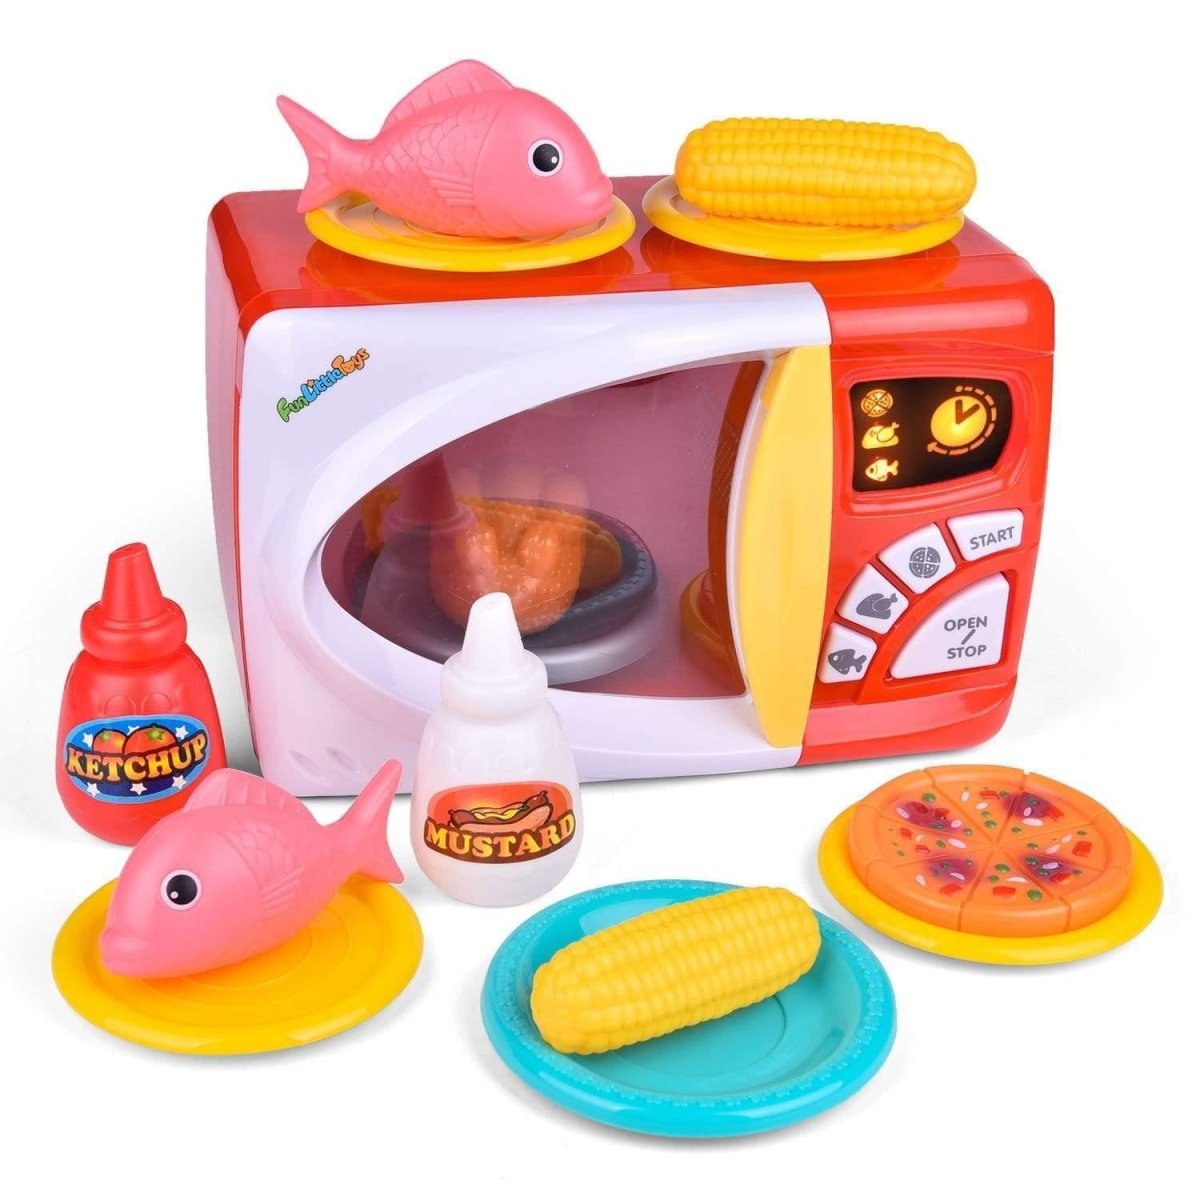 https://cdn.shopify.com/s/files/1/0484/0004/0096/products/microwave-oven-toy-wholesale-627737_1600x.jpg?v=1657749120